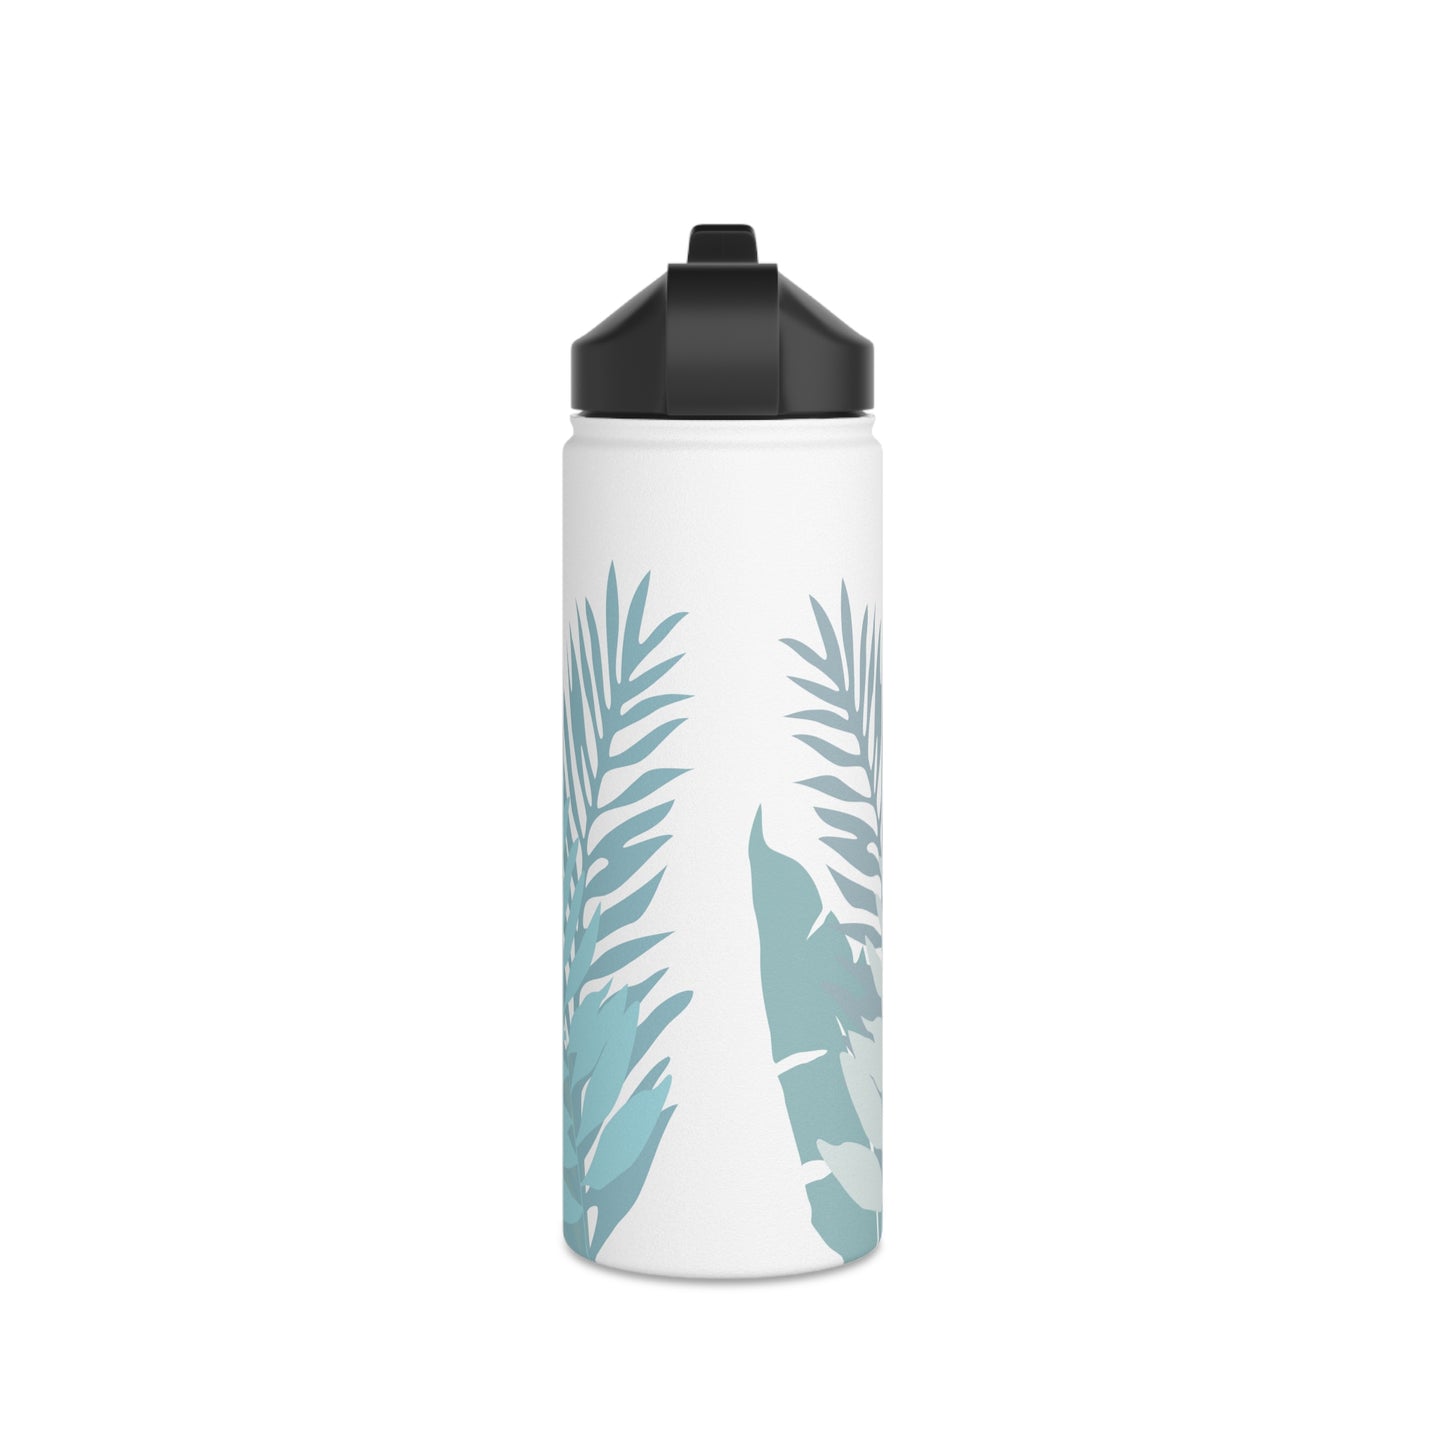 Water Bottle, 3 sizes, Stainless Steel with Sip Straw- Whispering Leaves in Blue